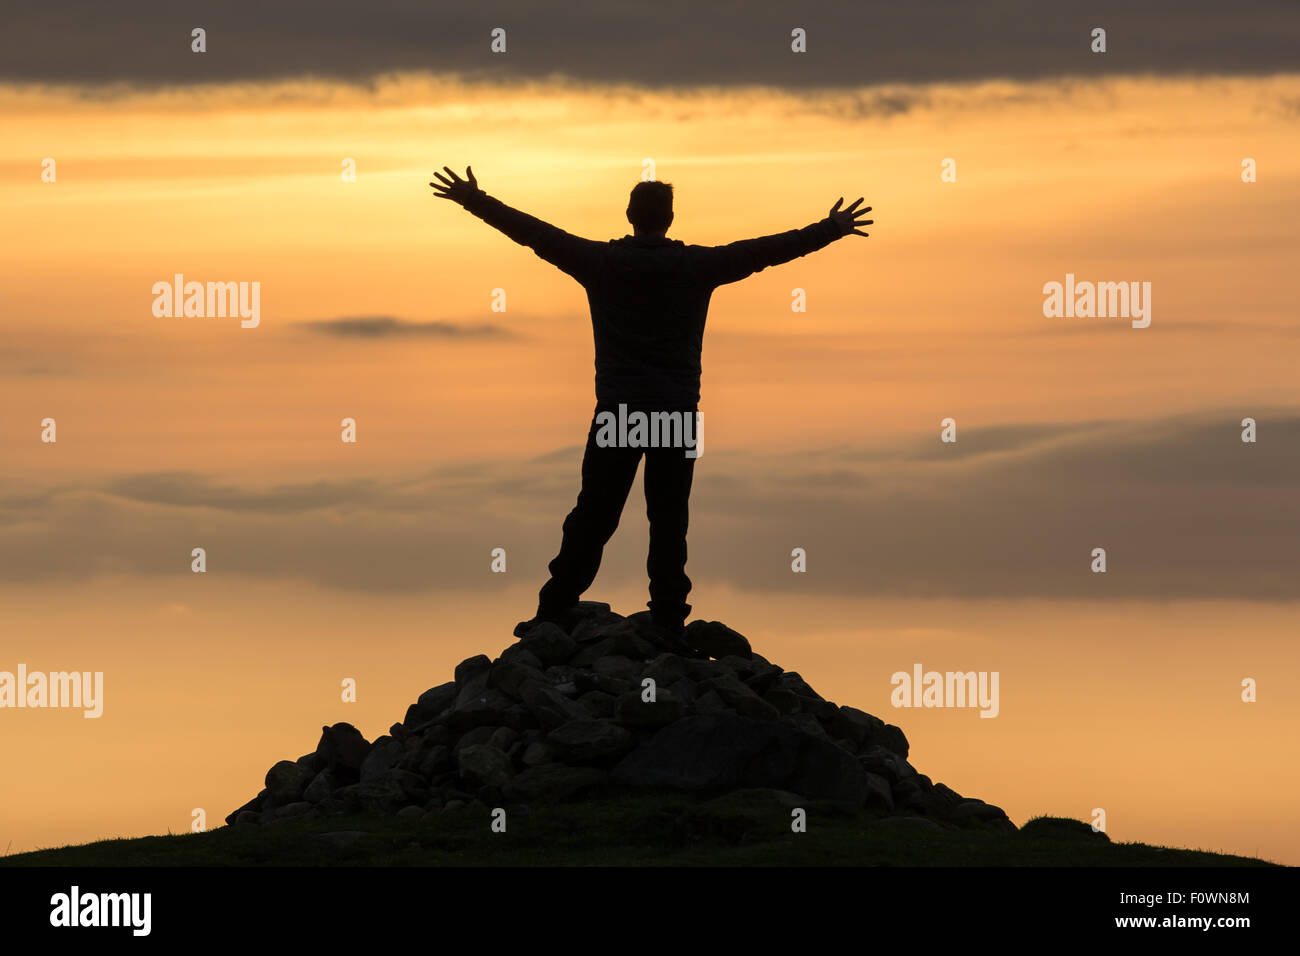 High achiever, silhouette of a man on top of a mountain Stock Photo